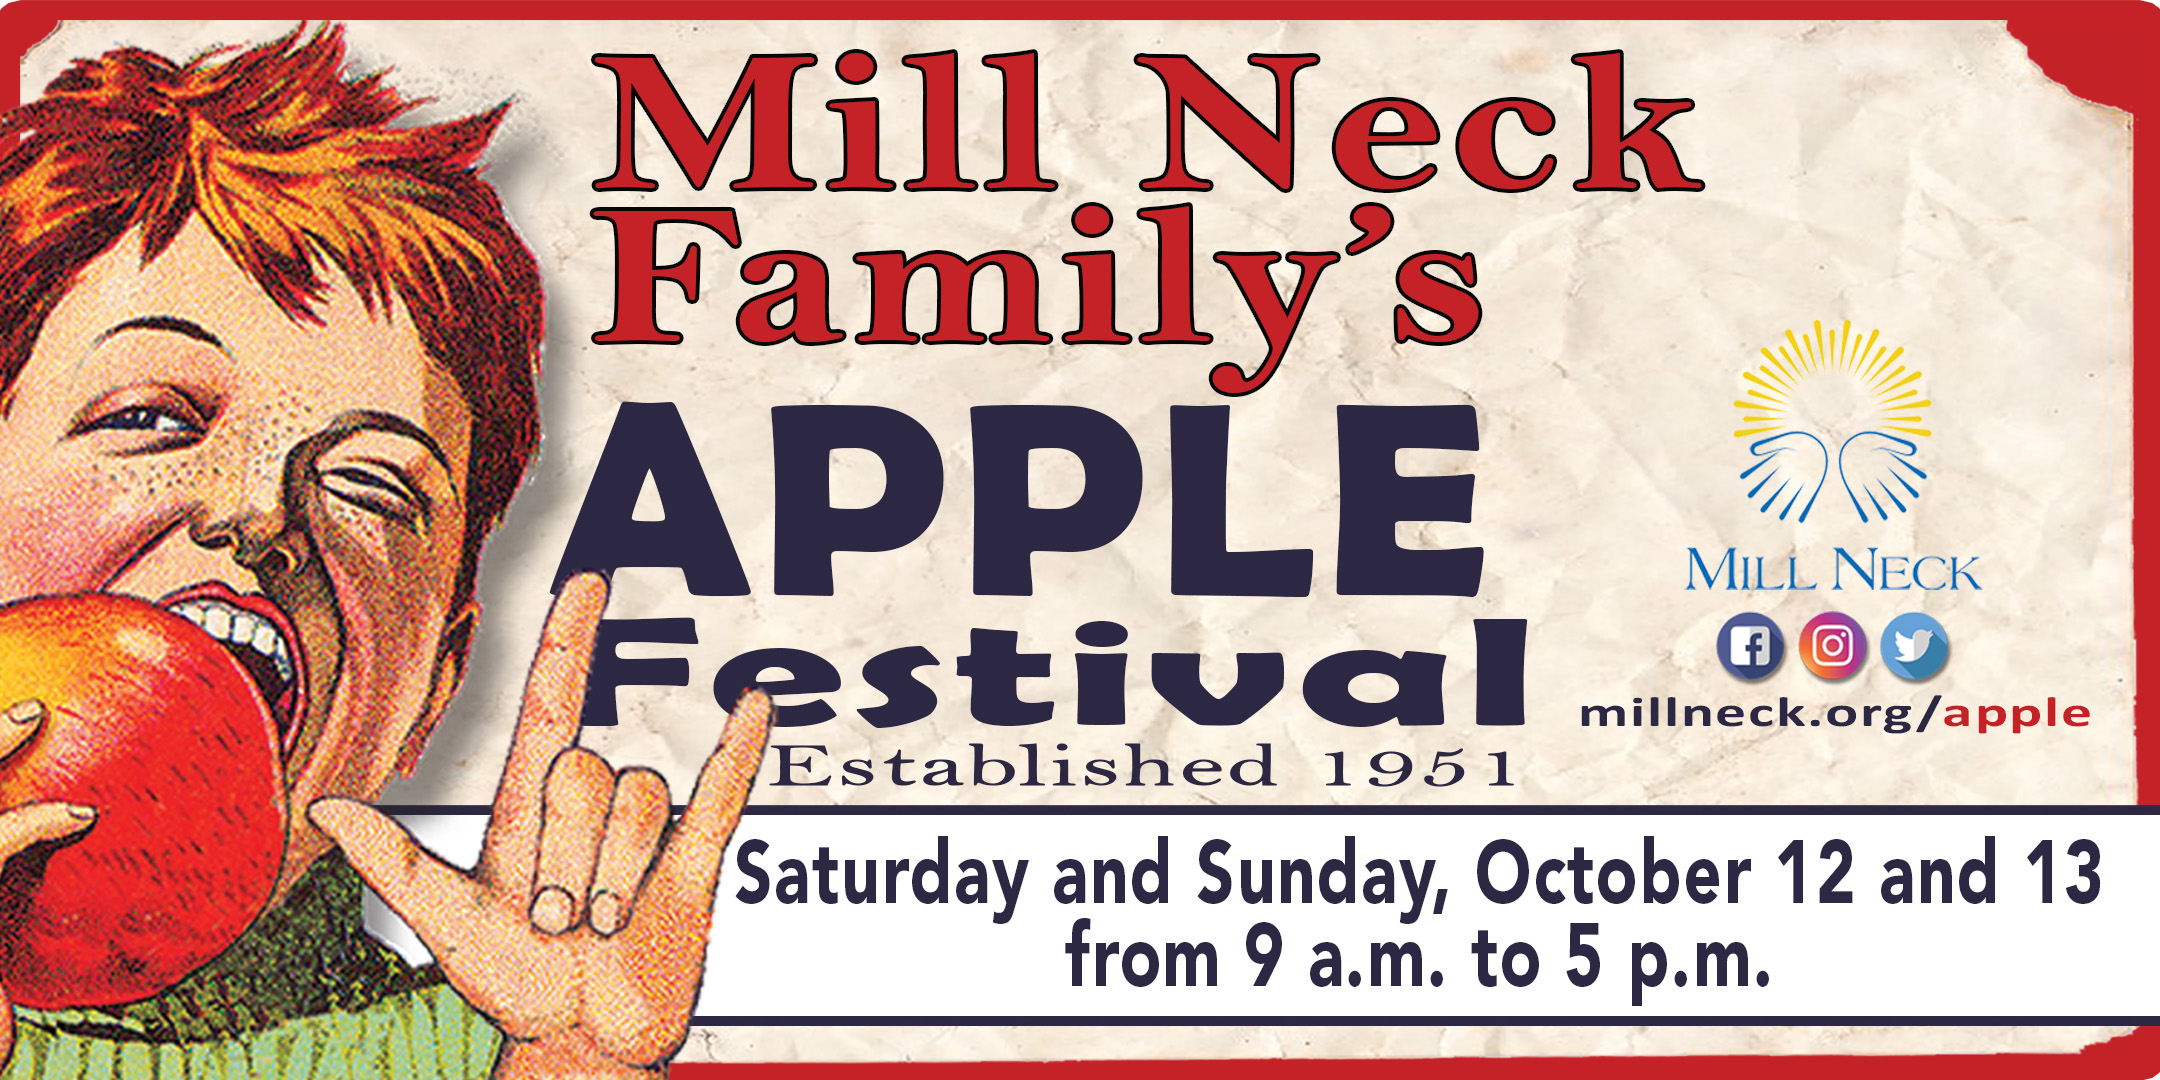 Apple Boy signs "love" in ASL, Mill Neck Family's Apple Festival Saturday and Sunday October 12 & 13, 2019